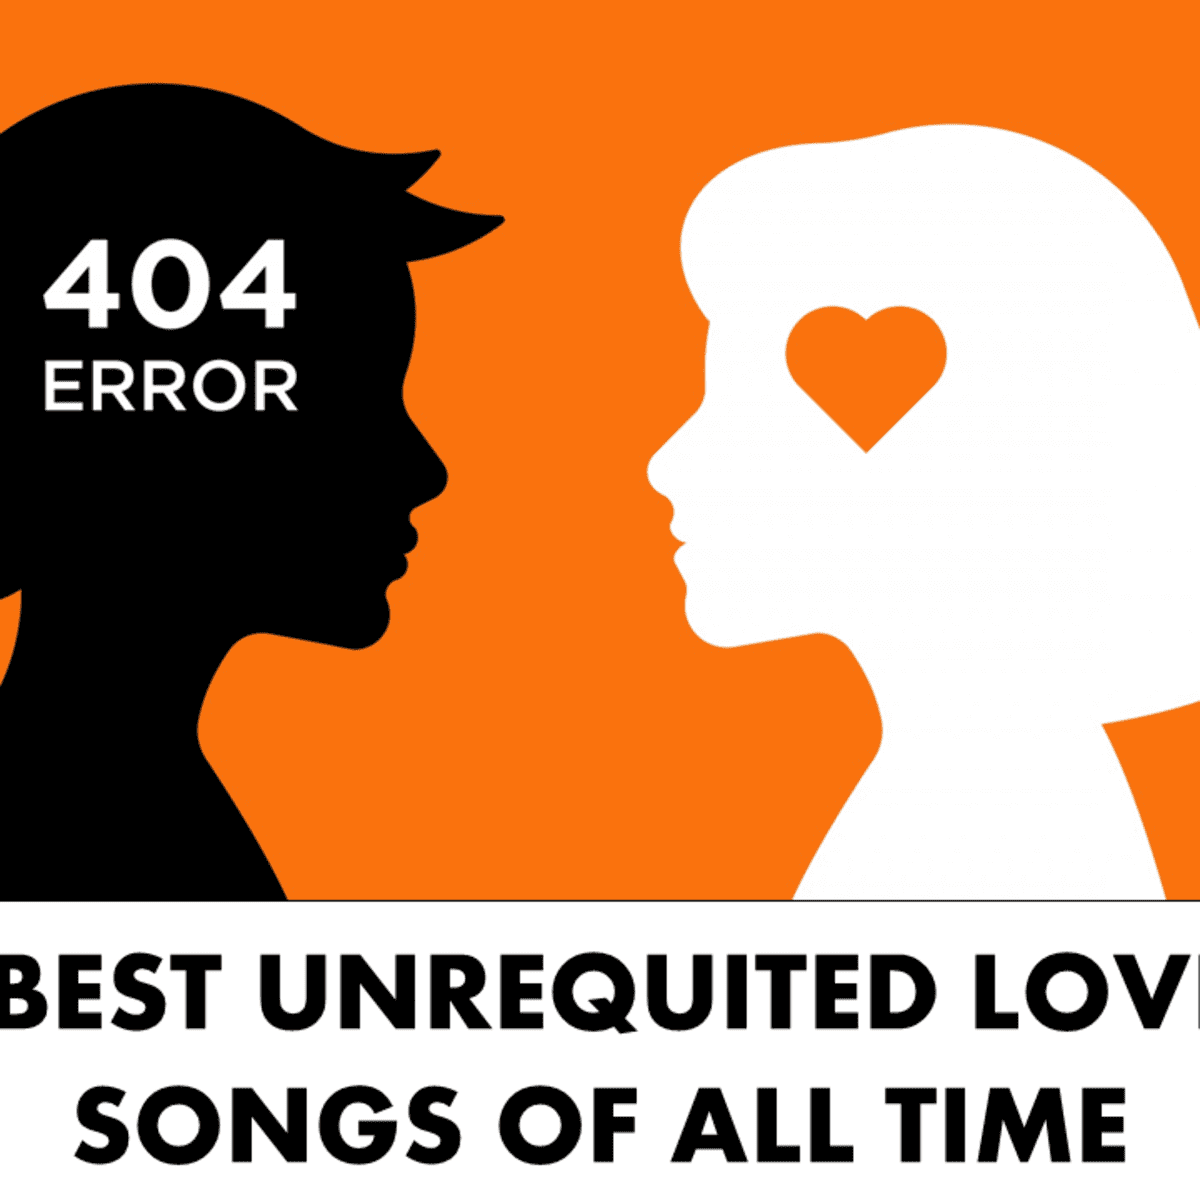 Love songs r&b unrequited about 17 Best